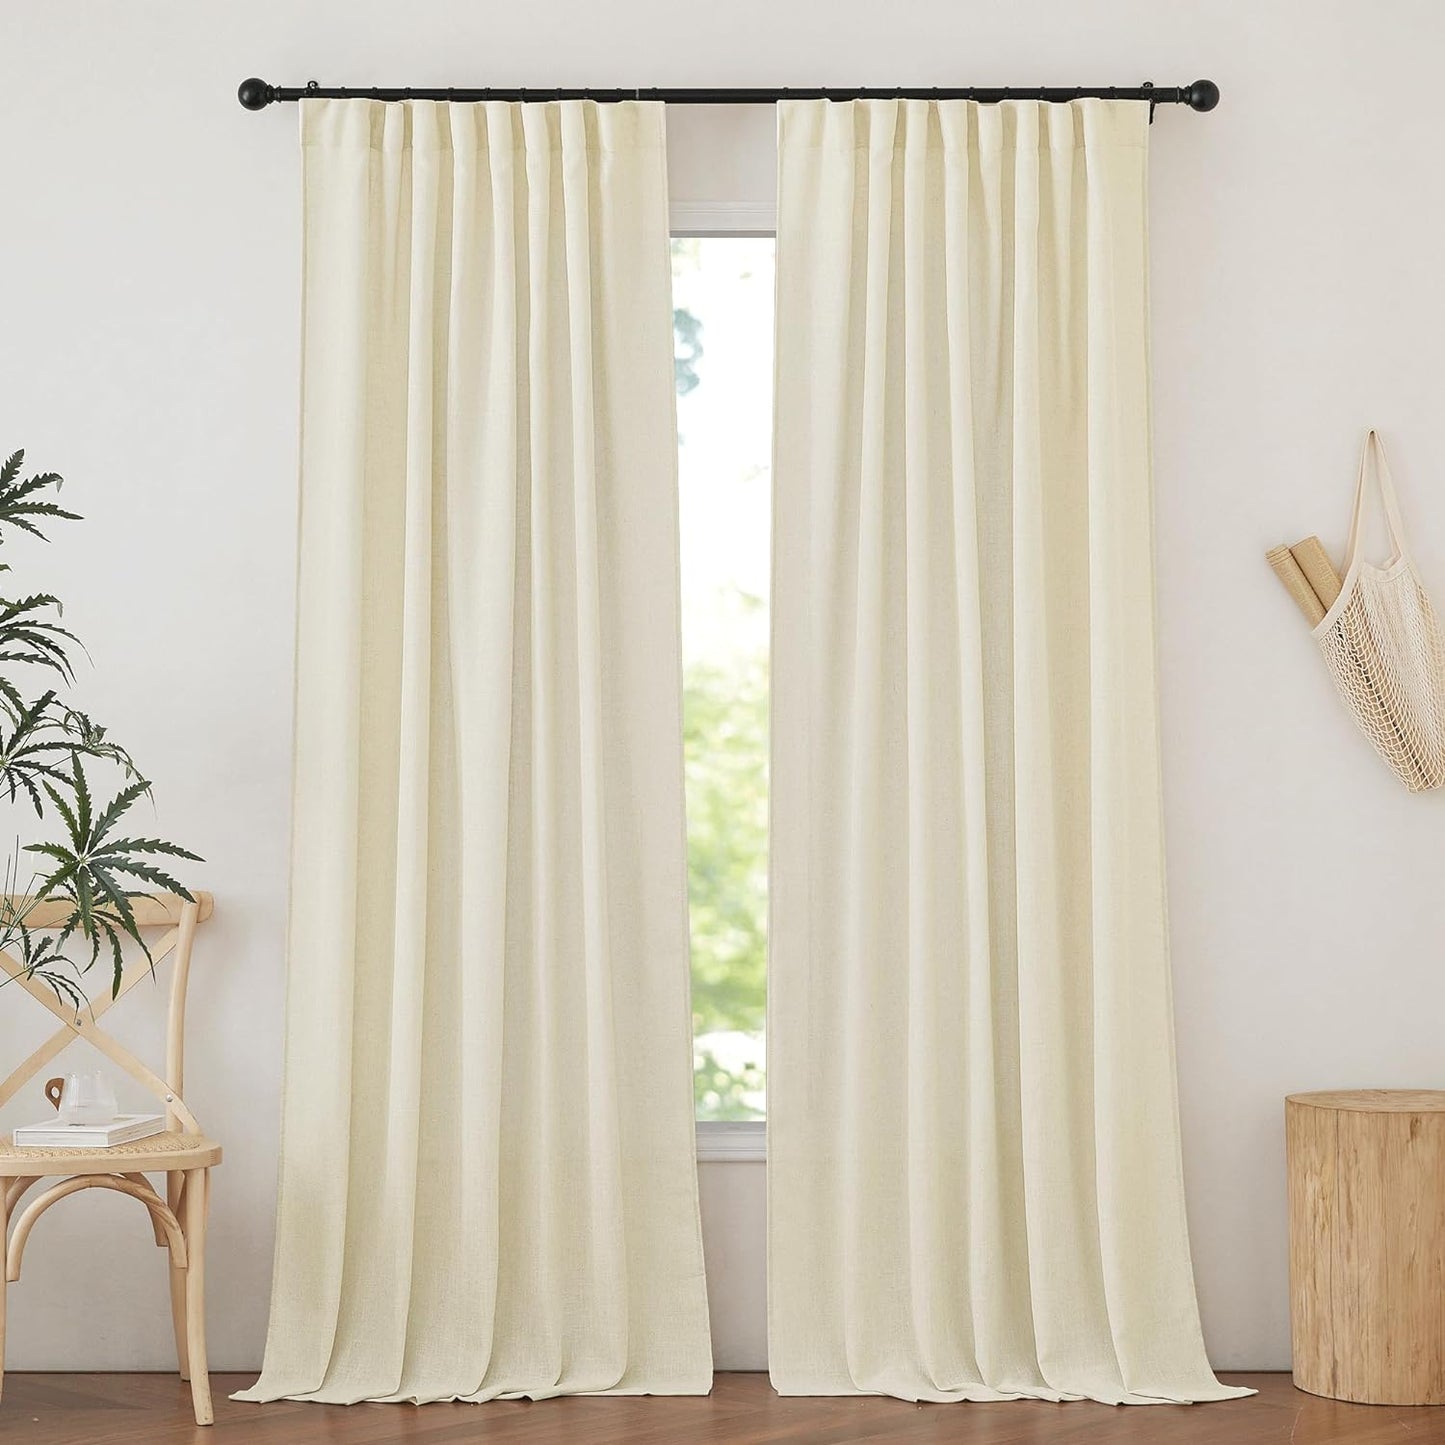 NICETOWN White Curtains Sheer - Semi Sheer Window Covering, Light & Airy Privacy Rod Pocket Back Tab Pinche Pleated Drapes for Bedroom Living Room Patio Glass Door, 52 X 63 Inches Long, Set of 2  NICETOWN Butter W52 X L84 